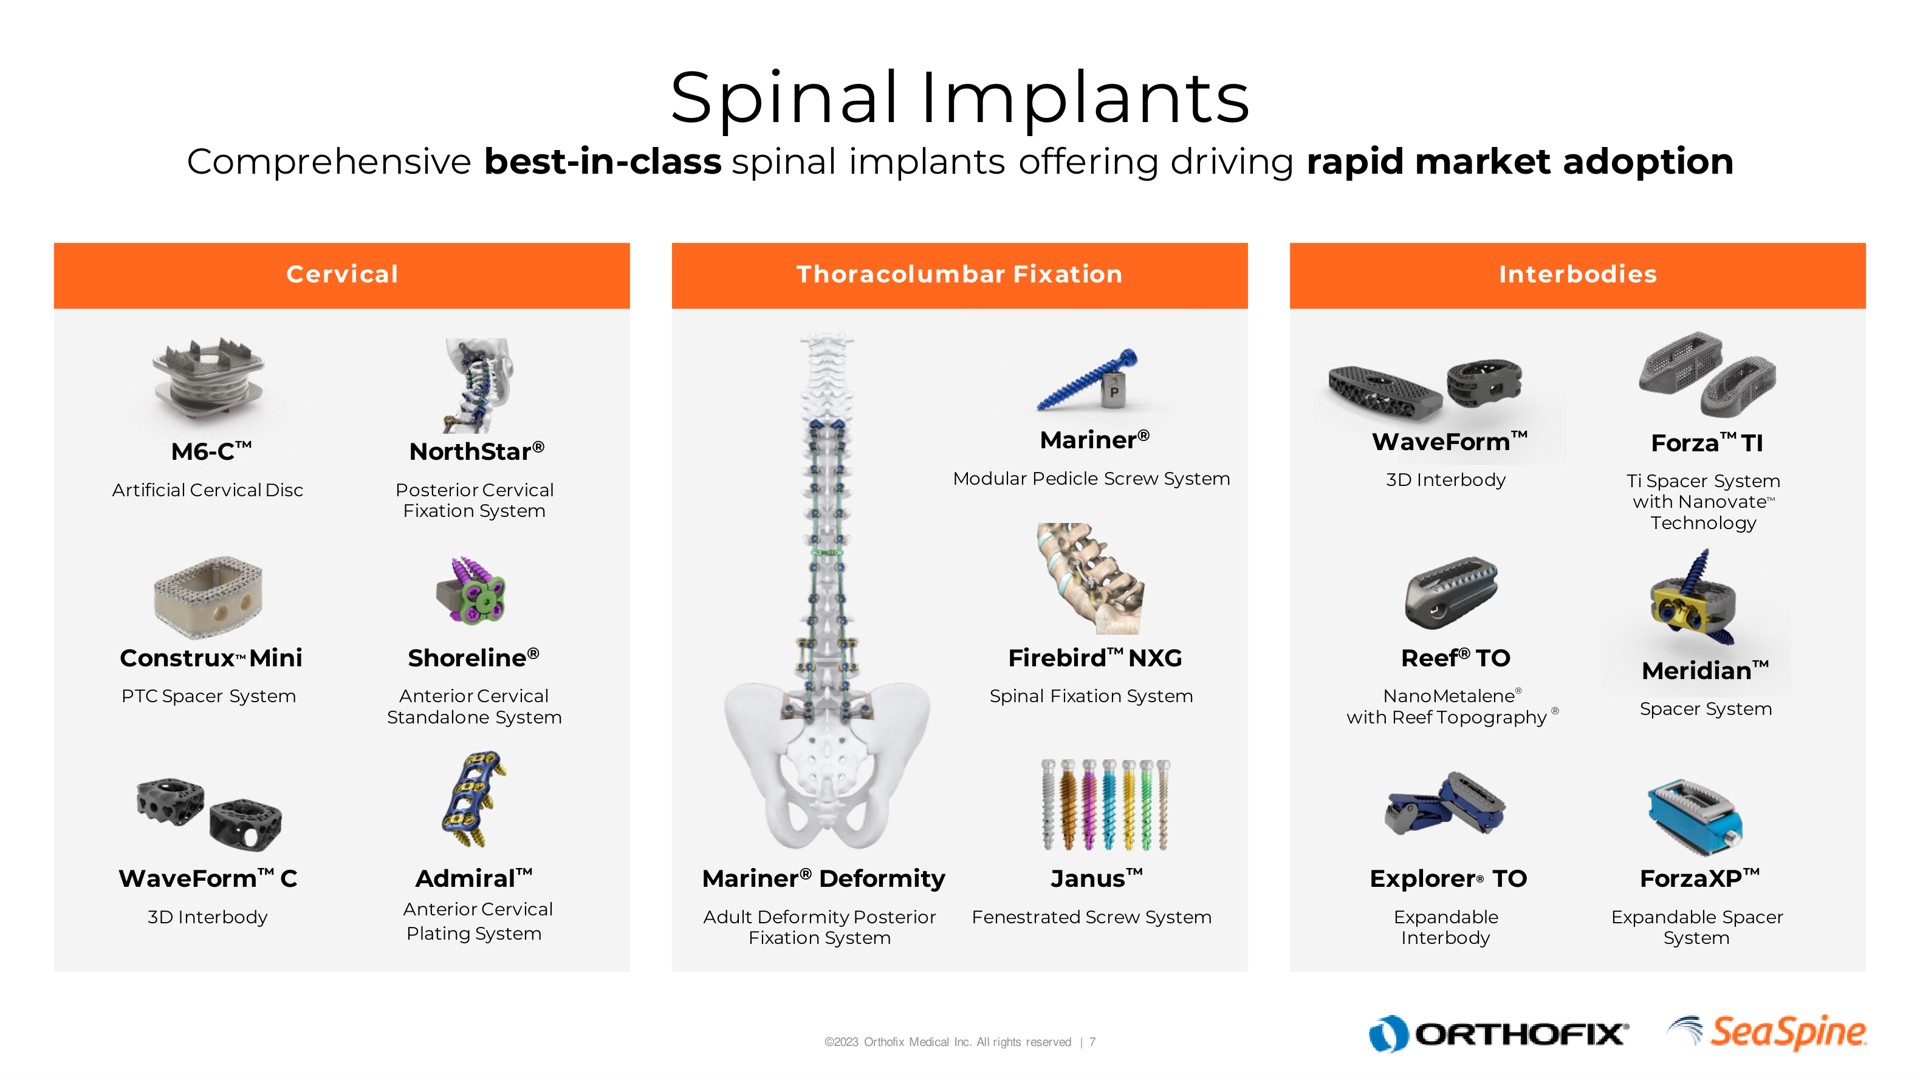 spinal implants by | Orthofix